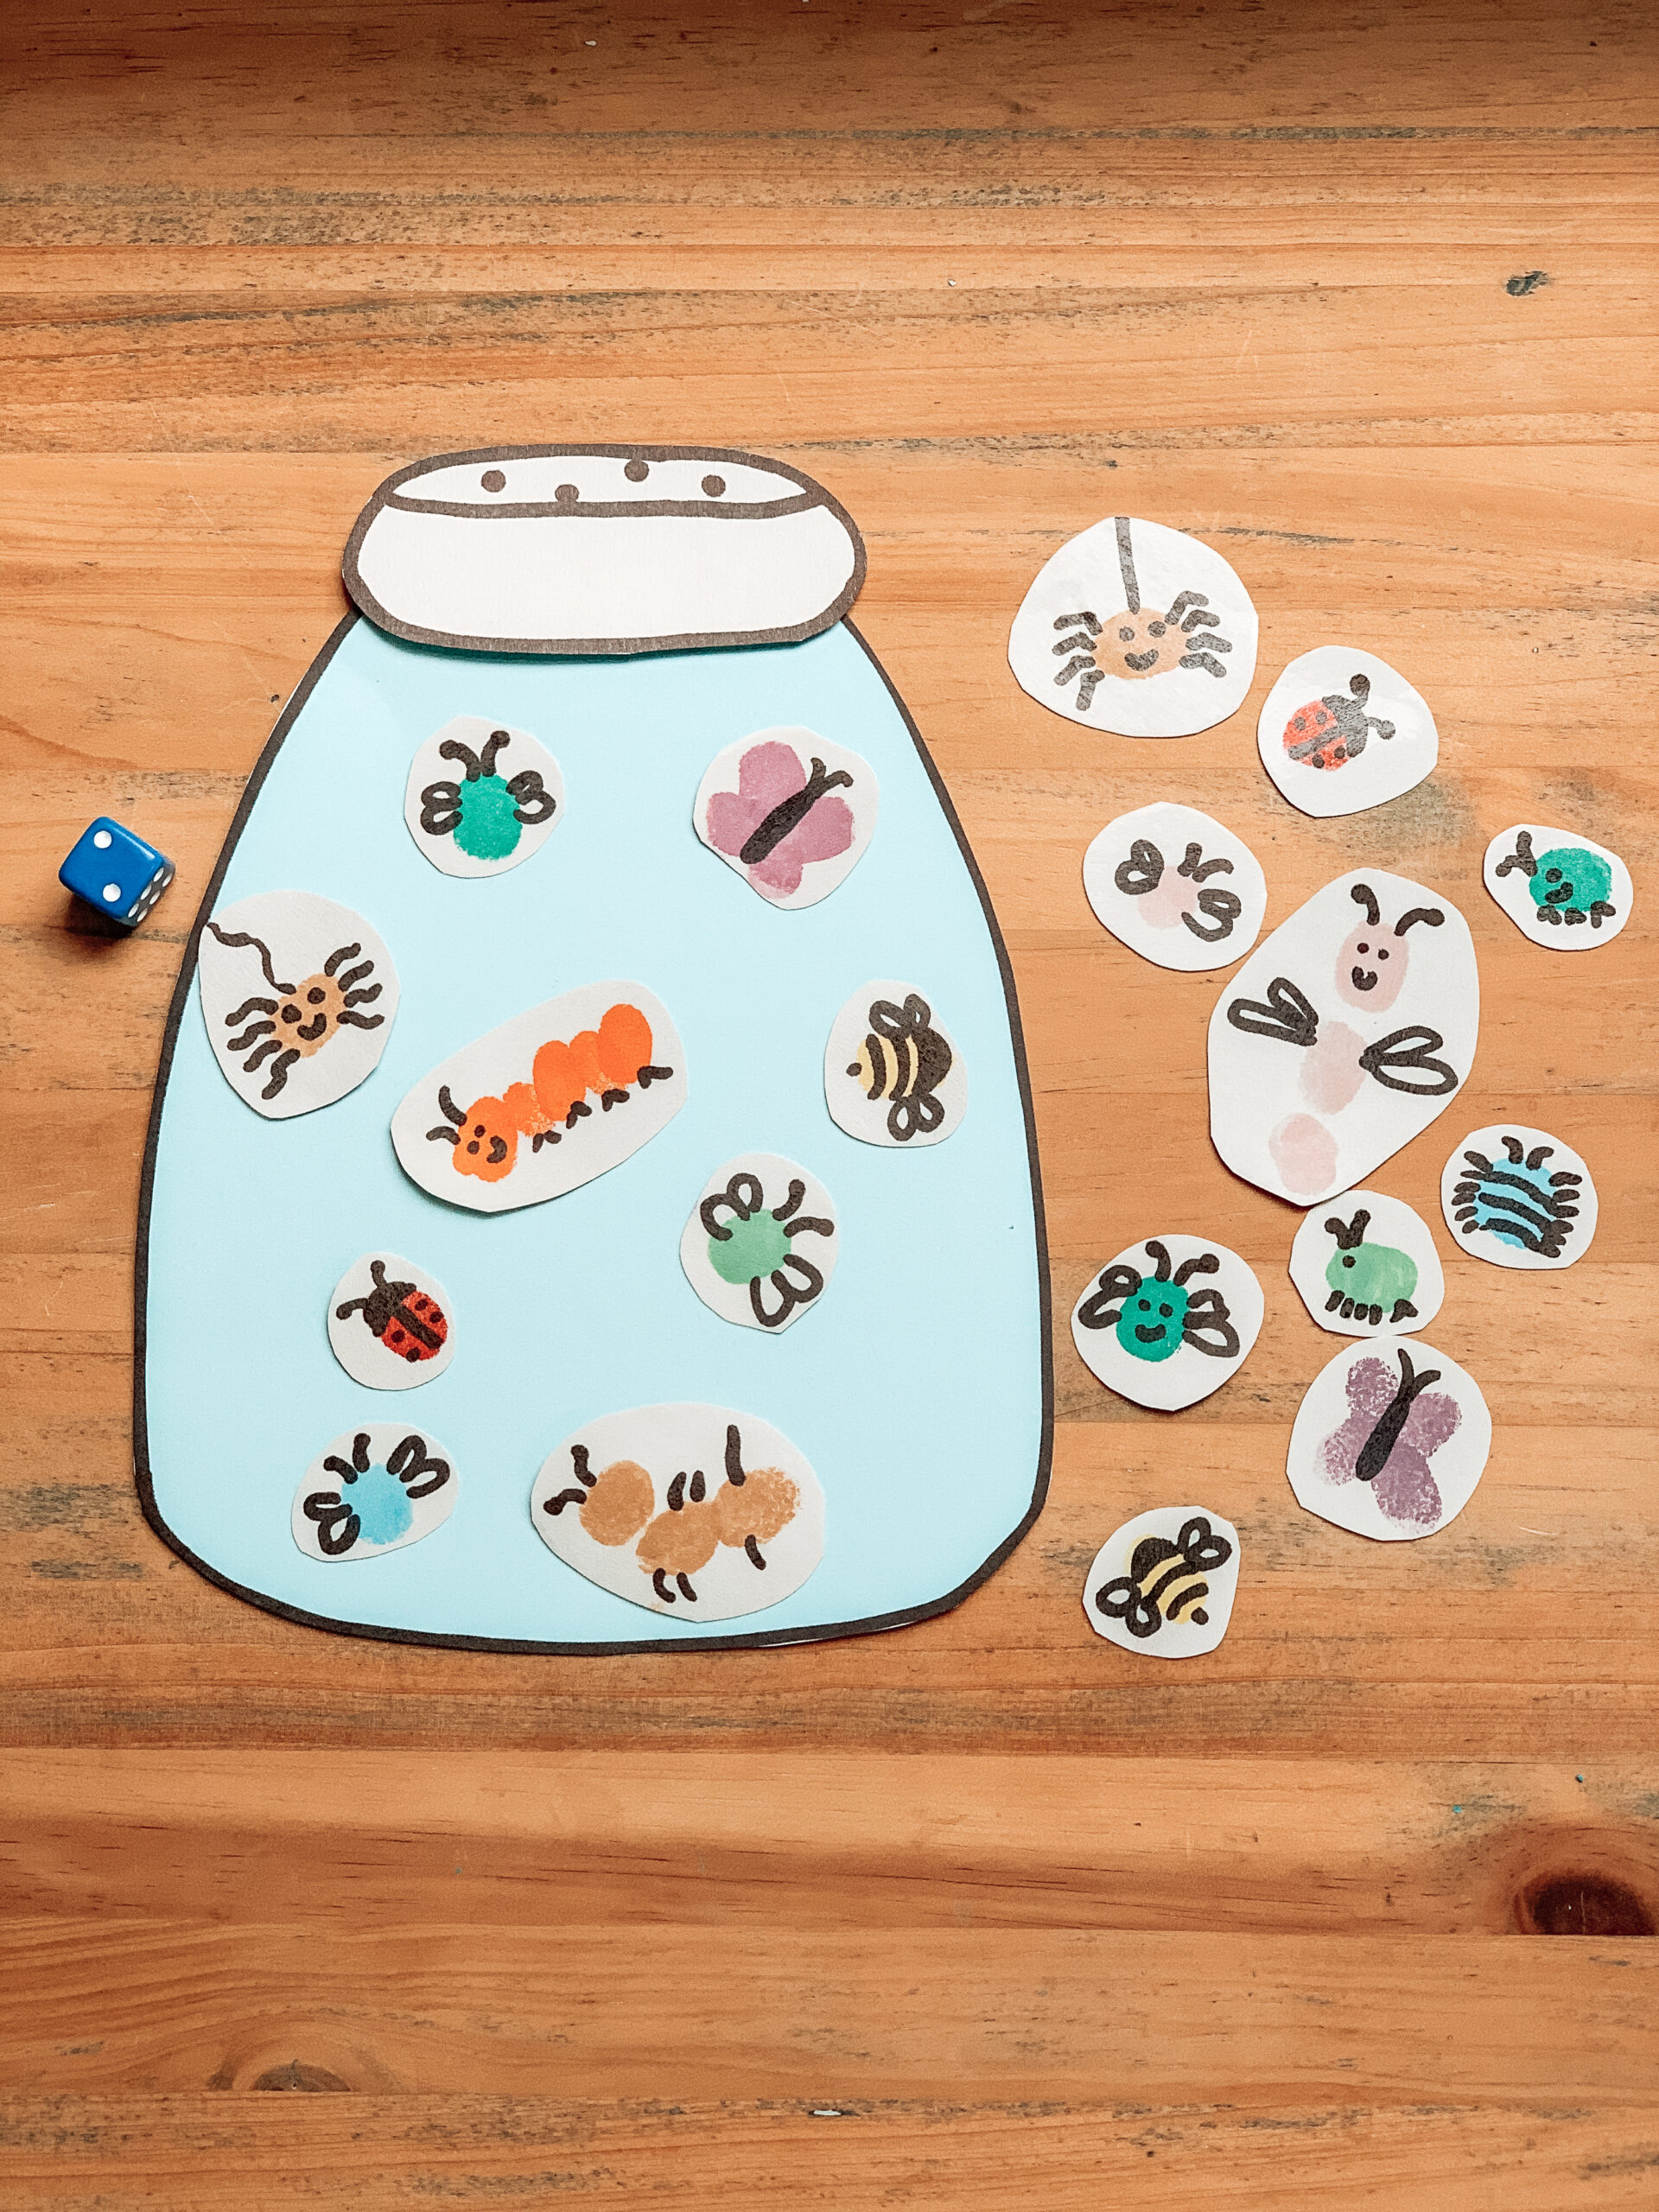 Kids fingerprint bug craft and counting game